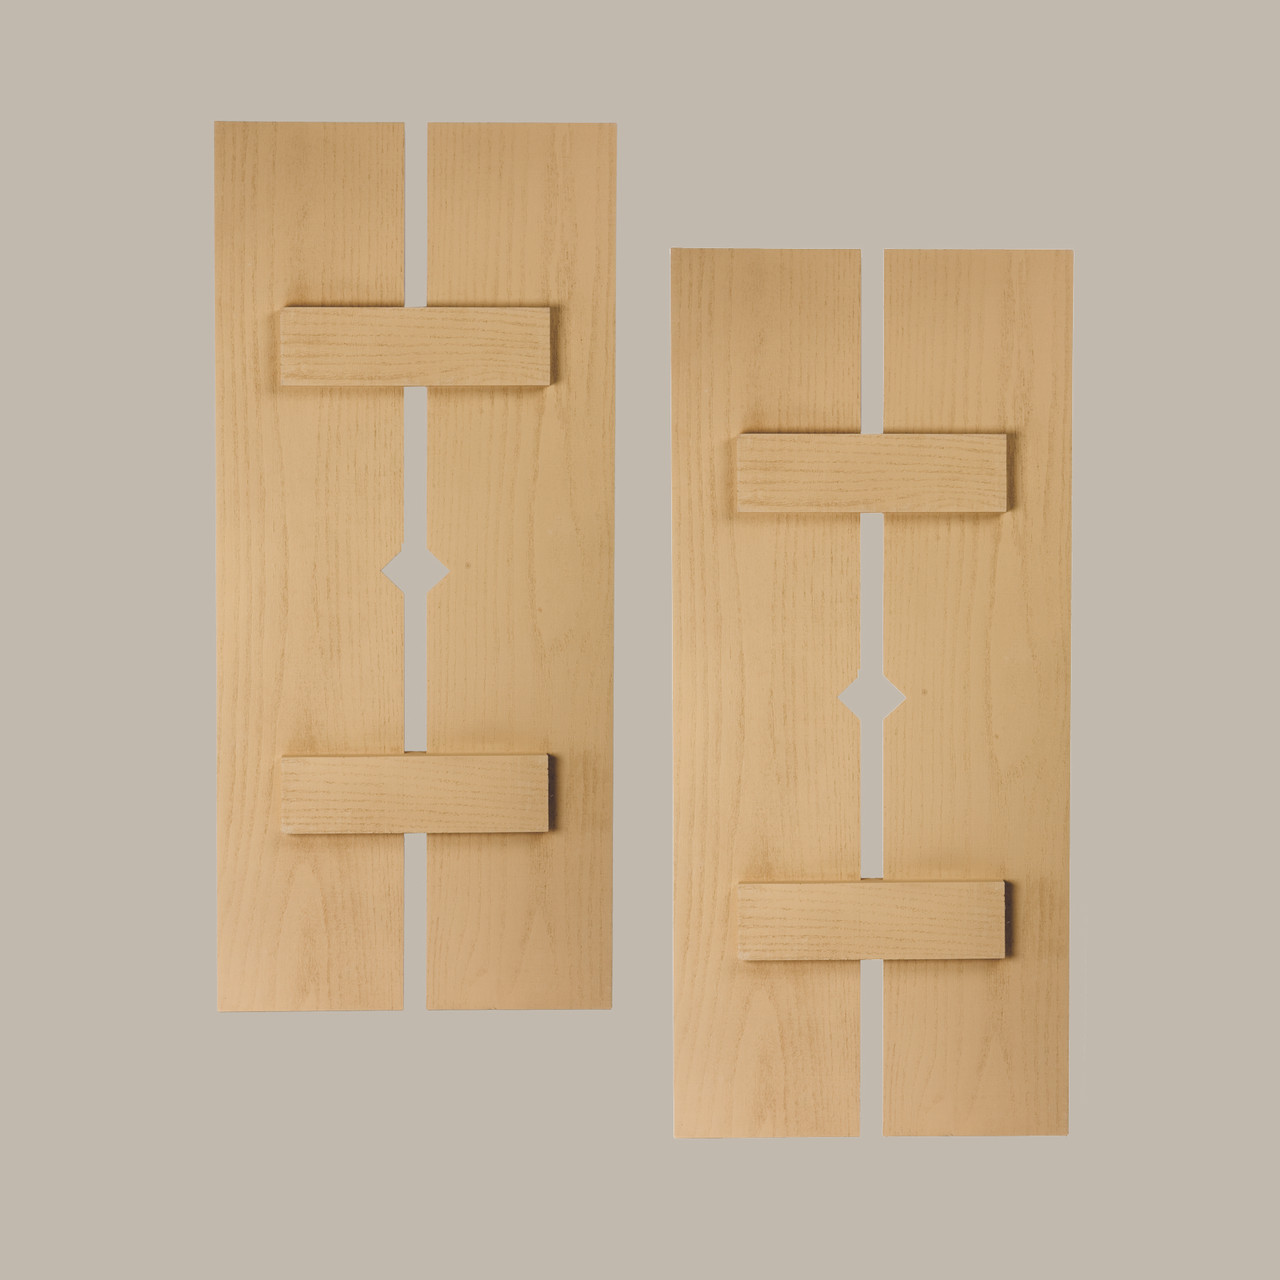 12 inch by 62 inch Plank Shutter with 2-Plank, Diamond